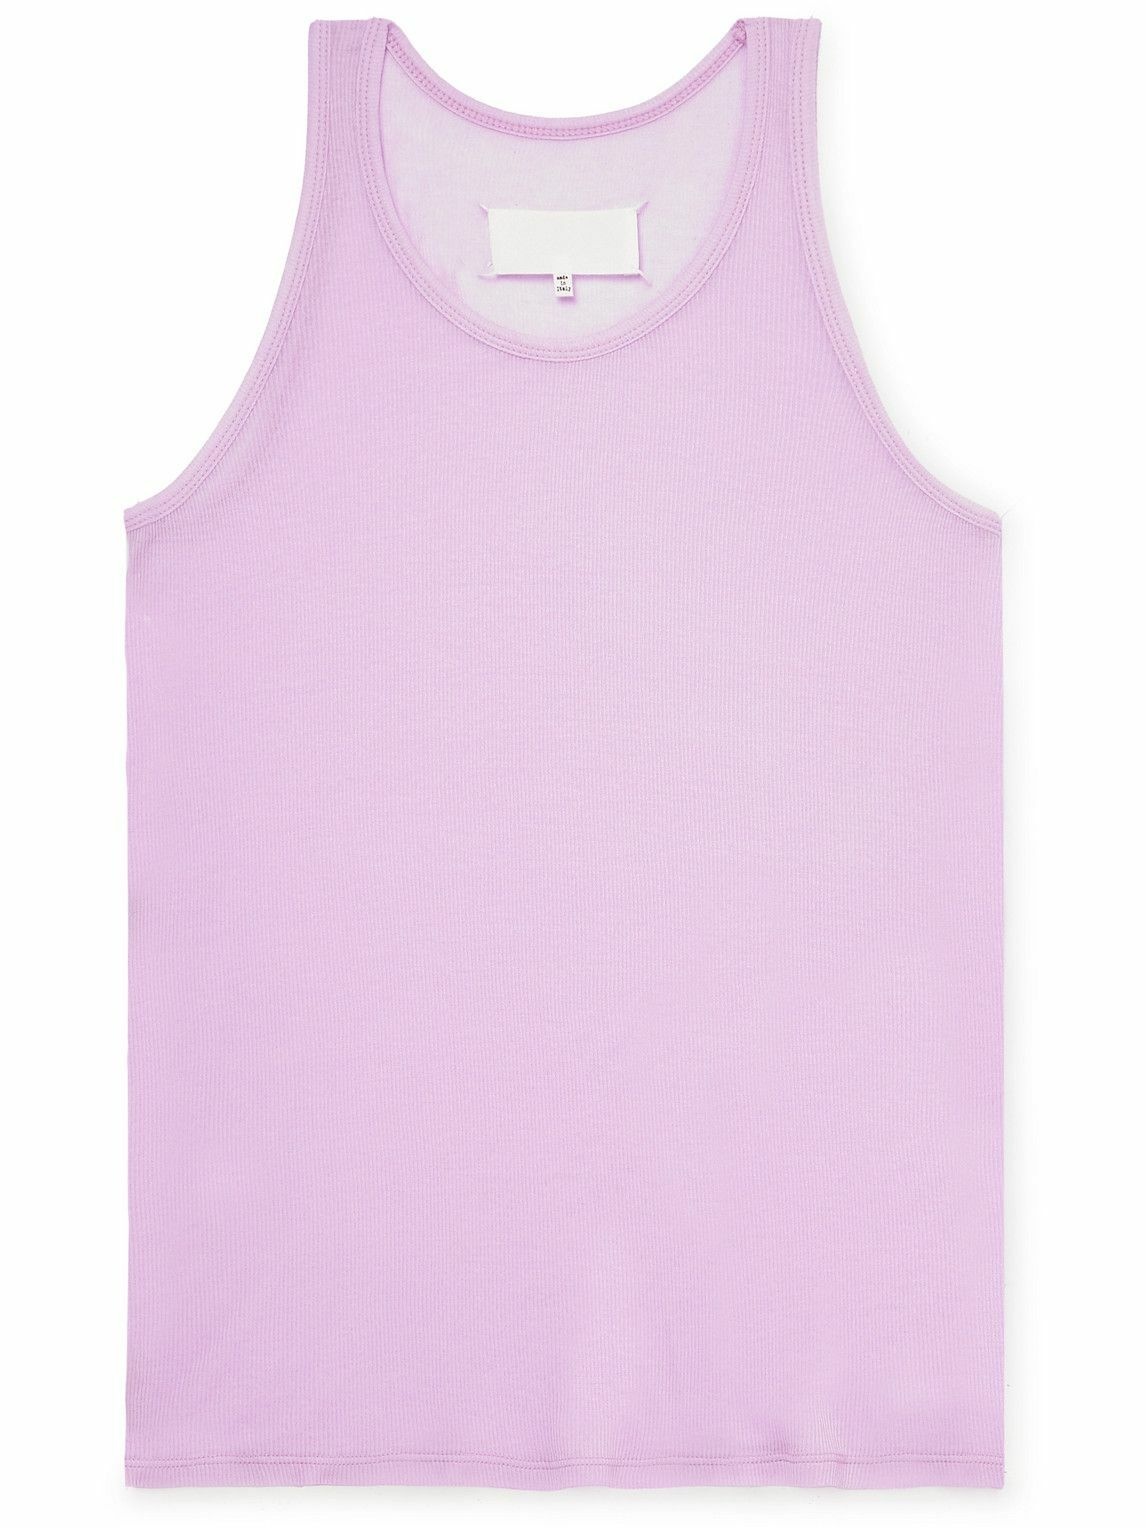 Maison Margiela - Ribbed Cotton and Silk-Blend Tank Top - Pink Maison ...